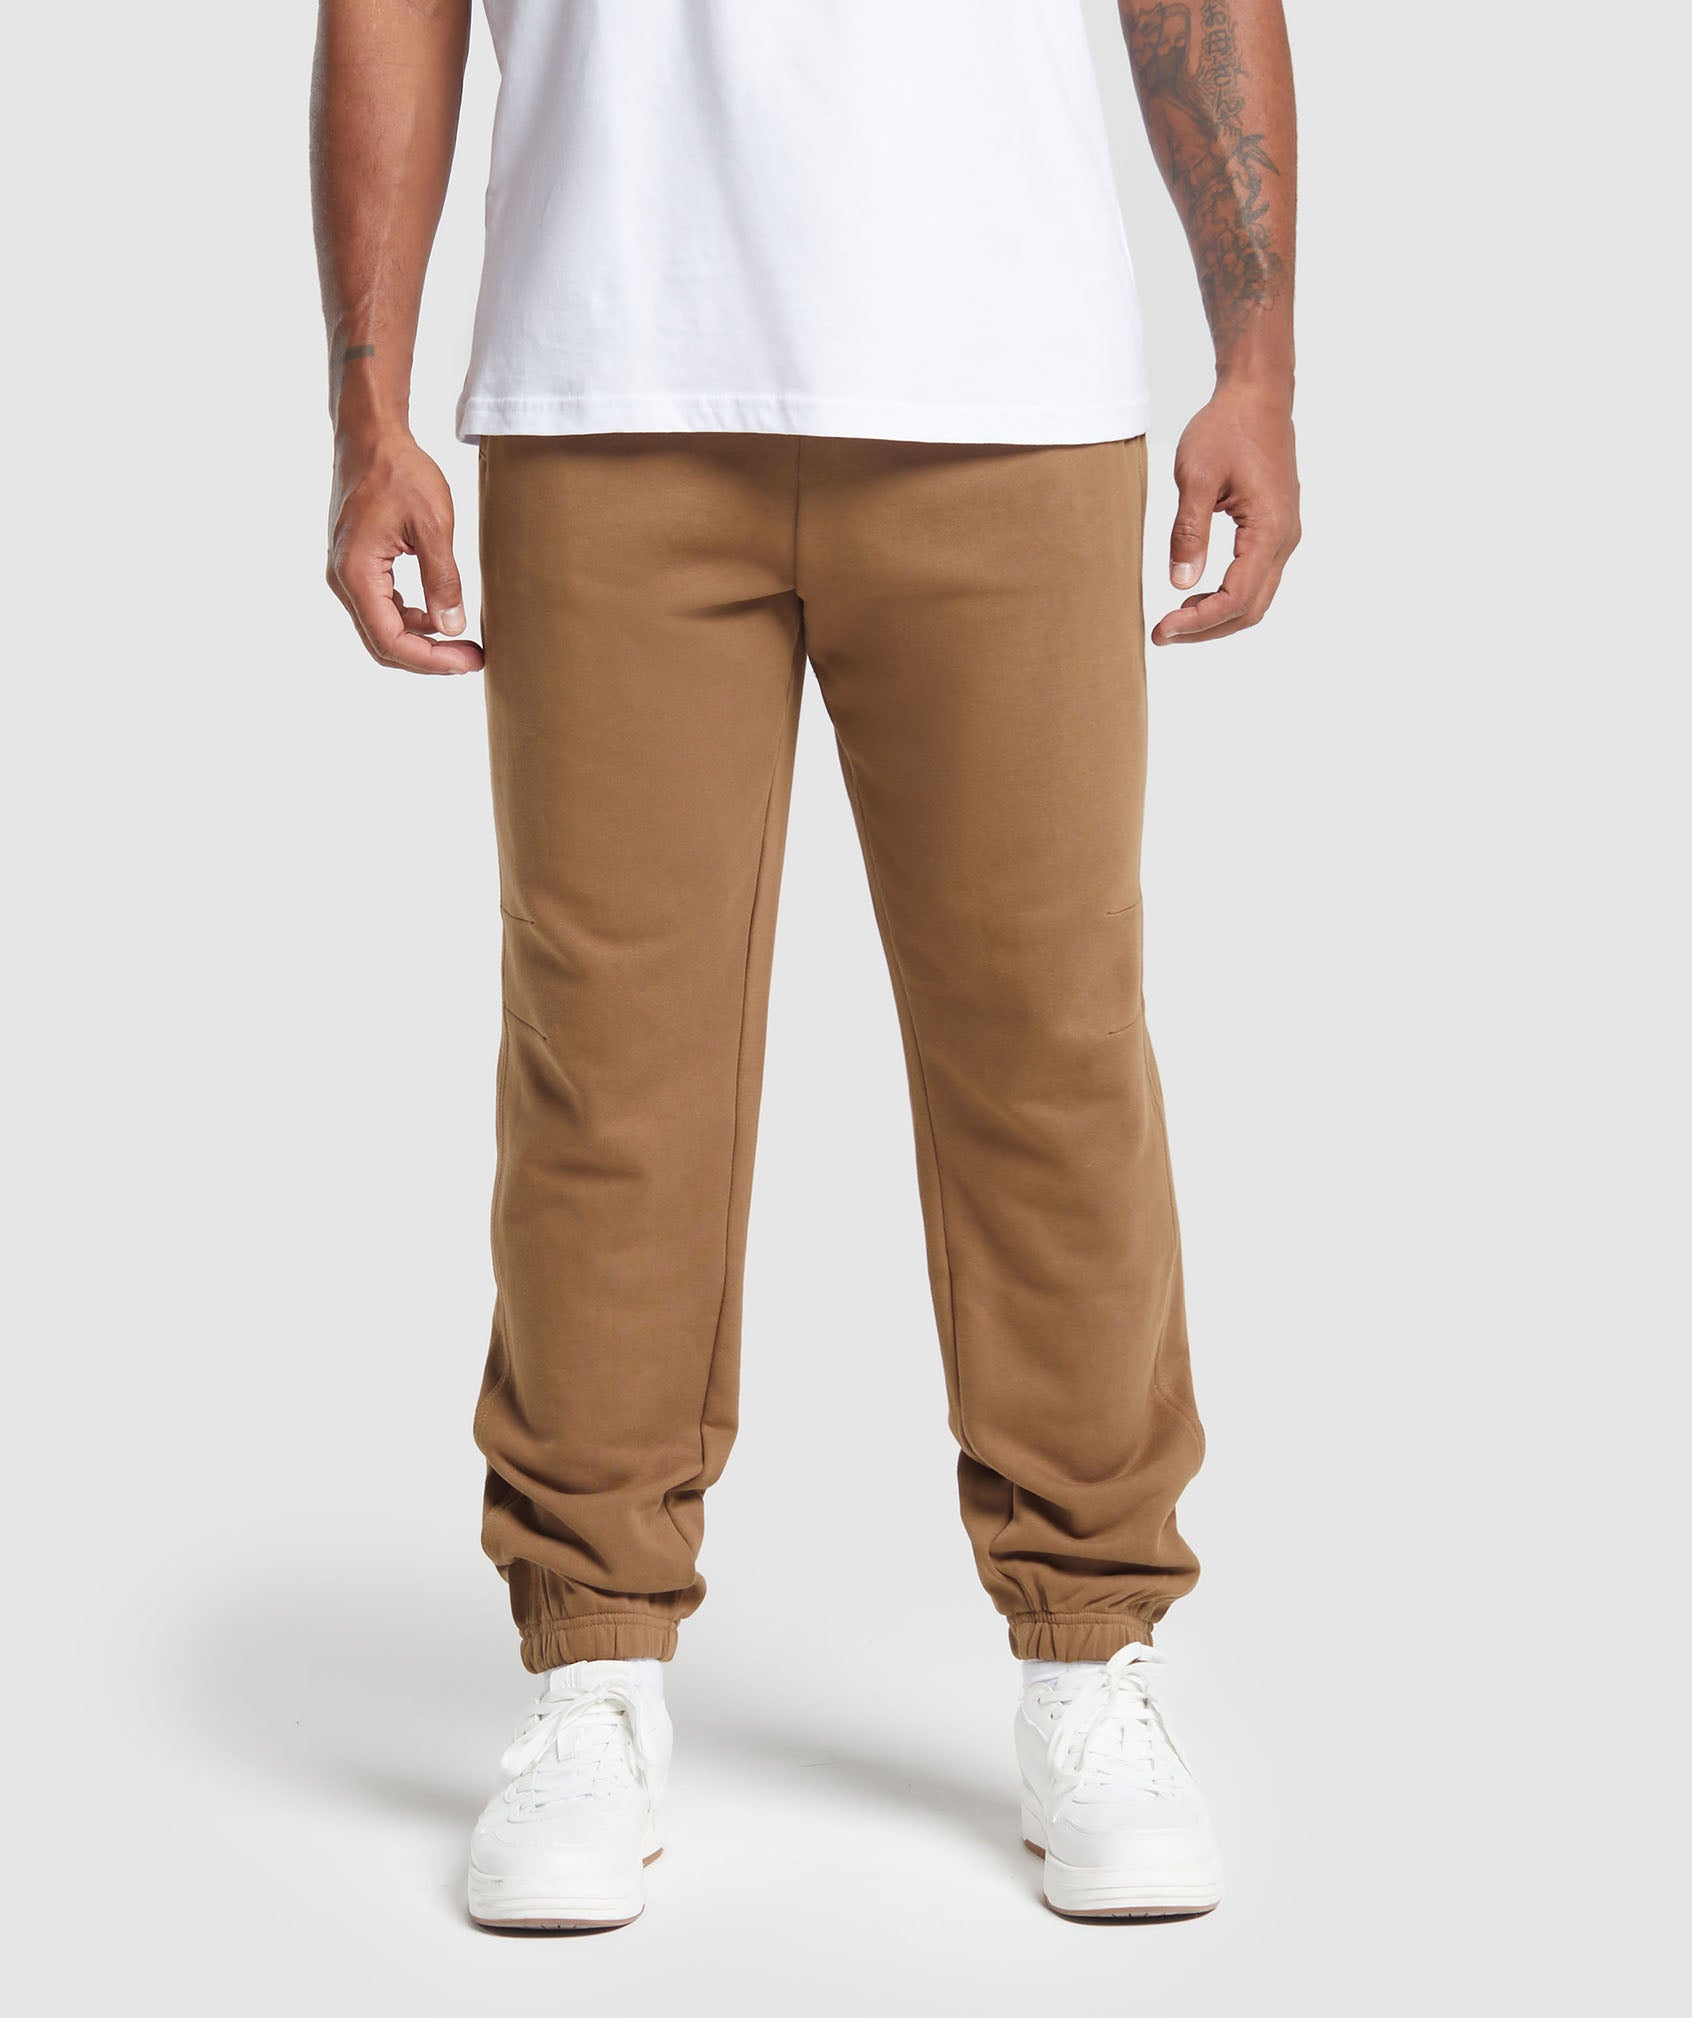 Rest Day Essentials Joggers in Caramel Brown